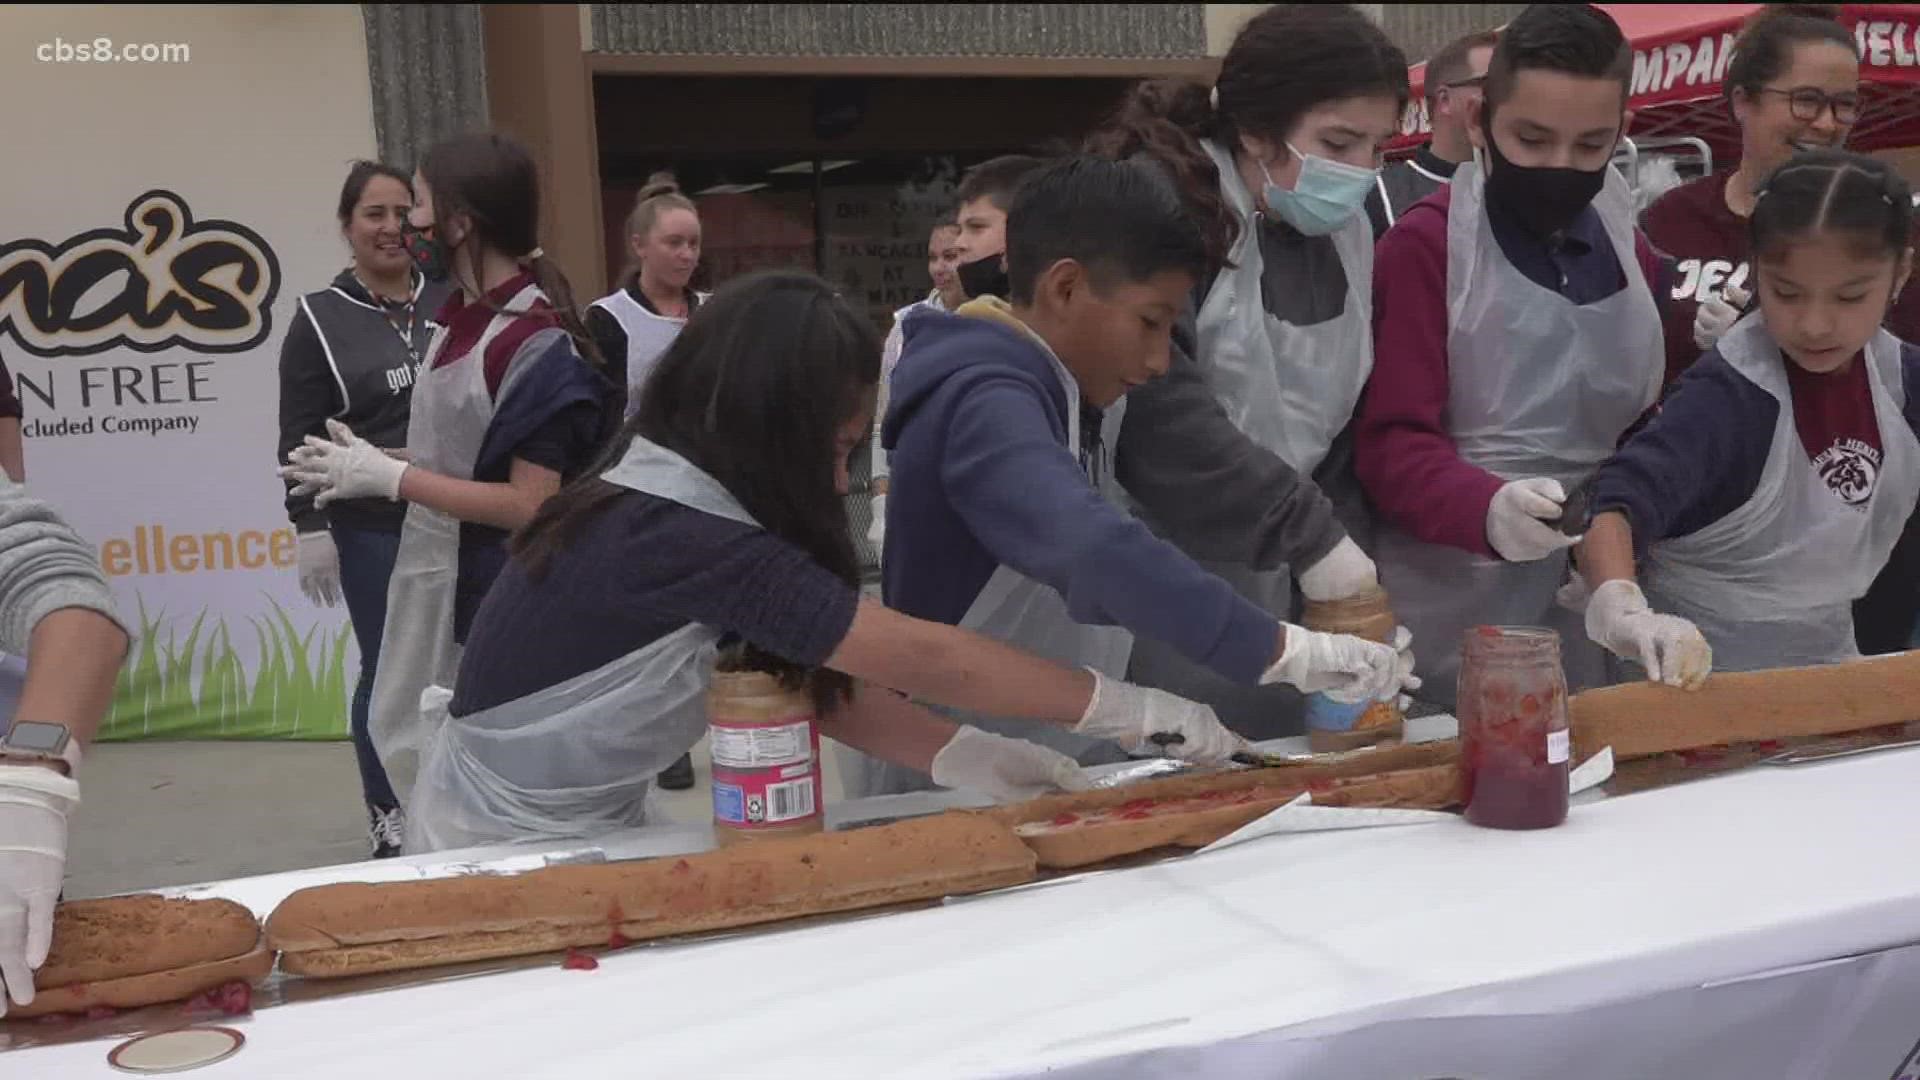 Heritage Elementary Charter school tries to beat the unofficial record of a 107 foot long PB&J sandwich.